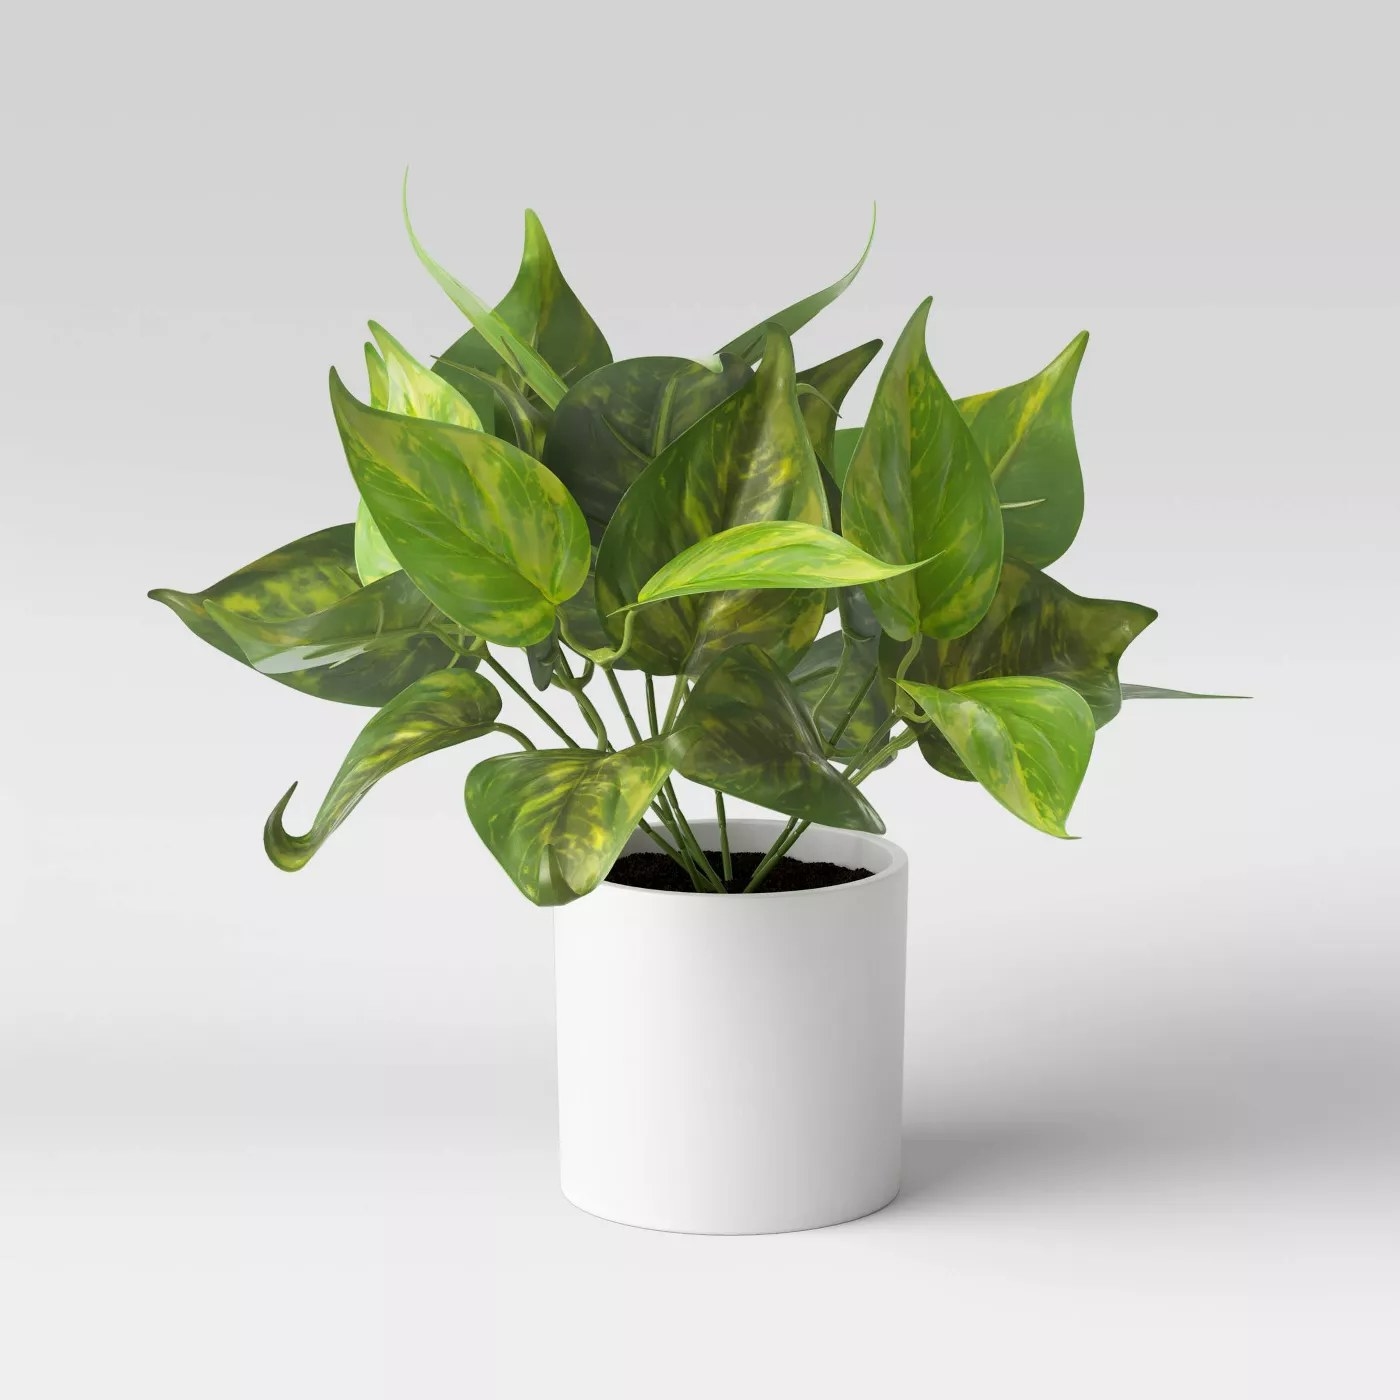 The plant is full of green and yellow speckled pothos leaves growing out of a white, sleek pot